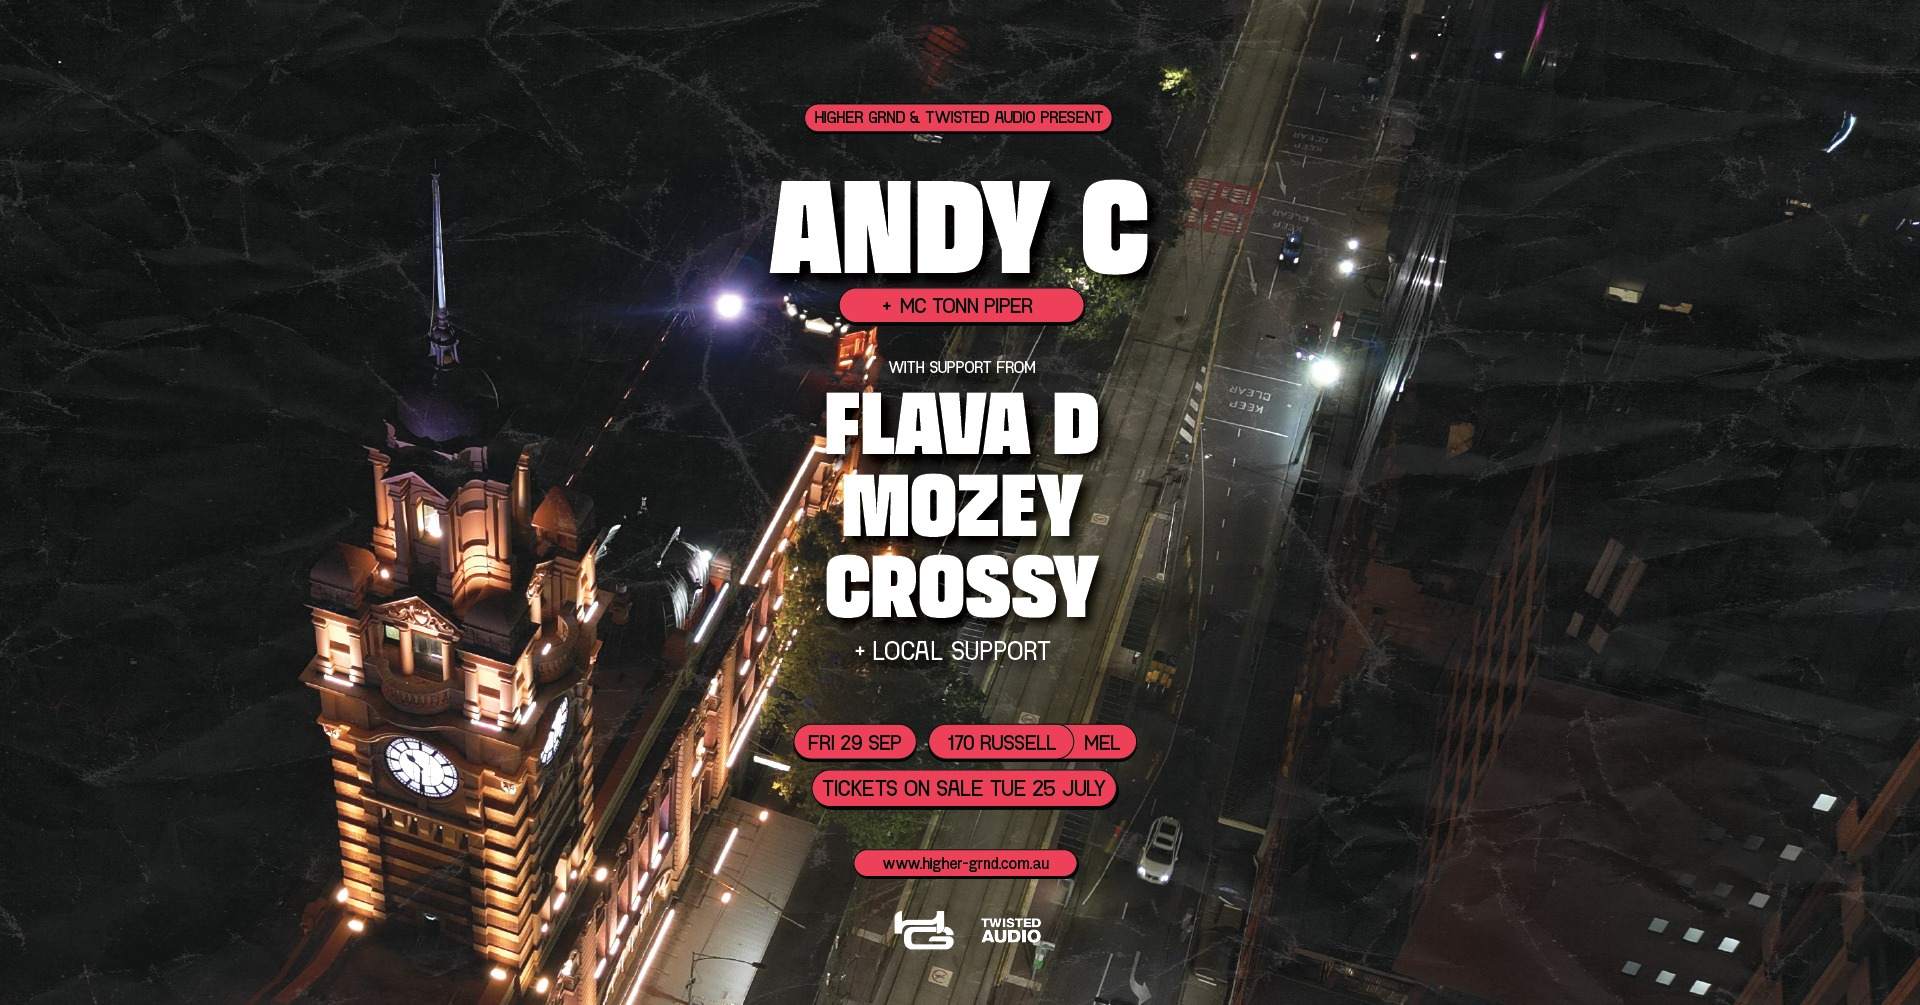 Higher Grnd + Twisted Audio present: Andy C, Flava D, Mozey & Crossy - フライヤー表